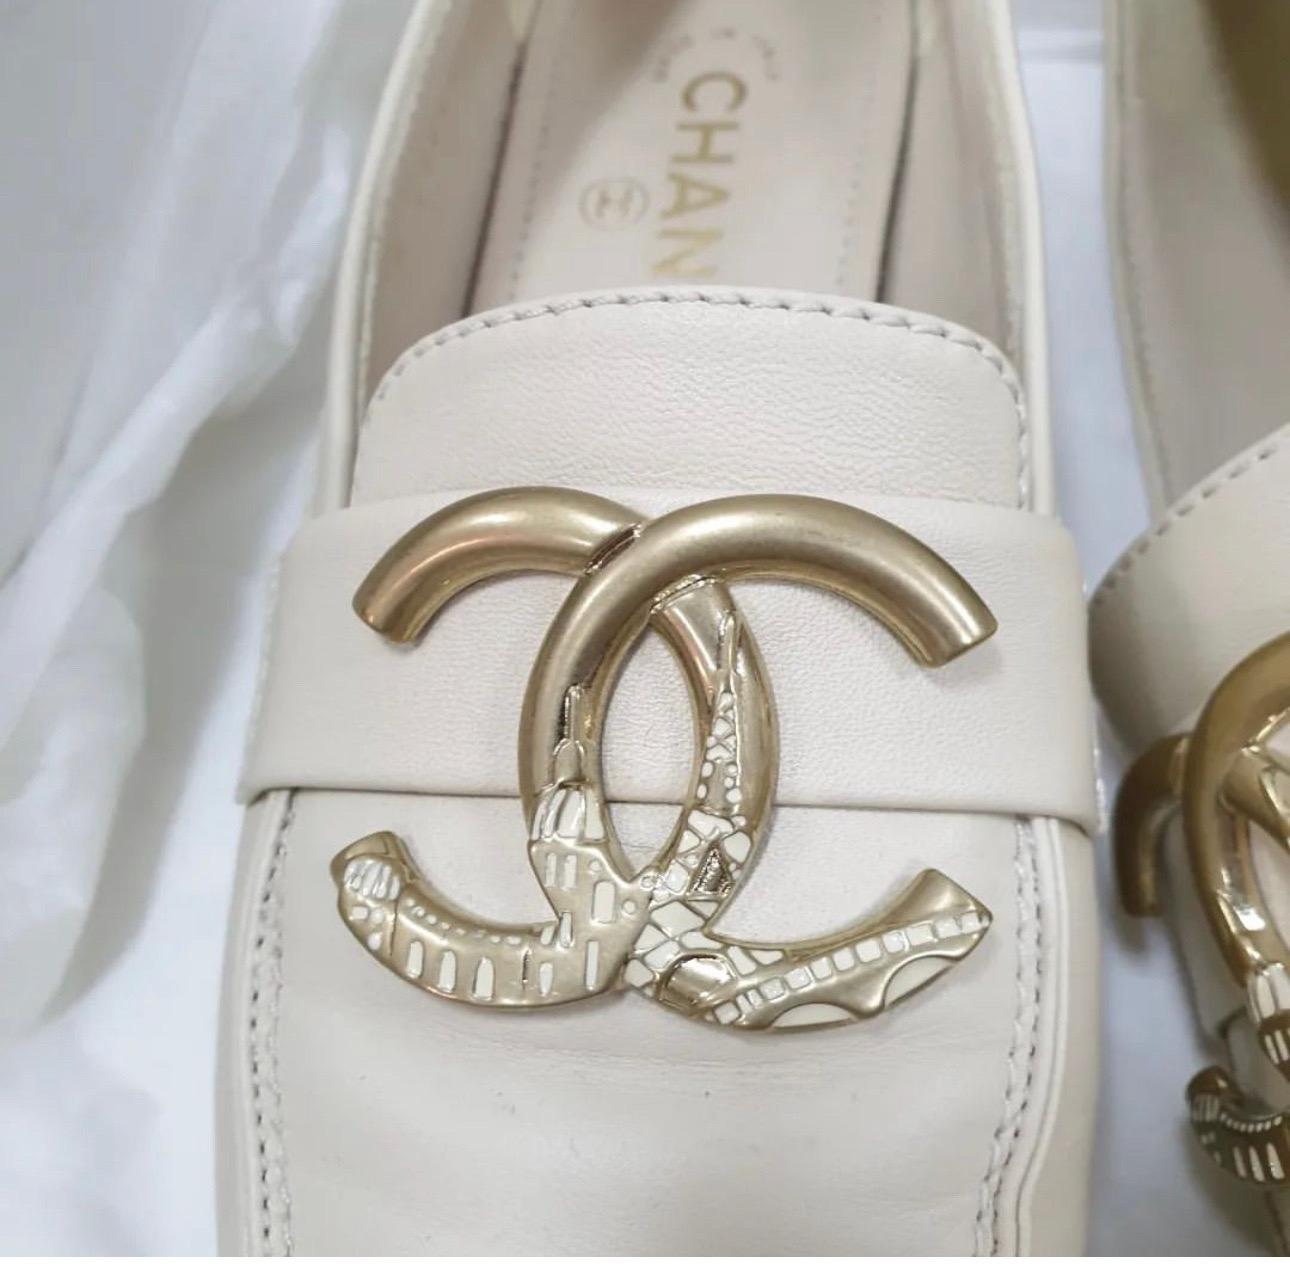 CHANEL Women's CC Logo Loafers
very good condition.
Sz.39
No box. No dust bag.